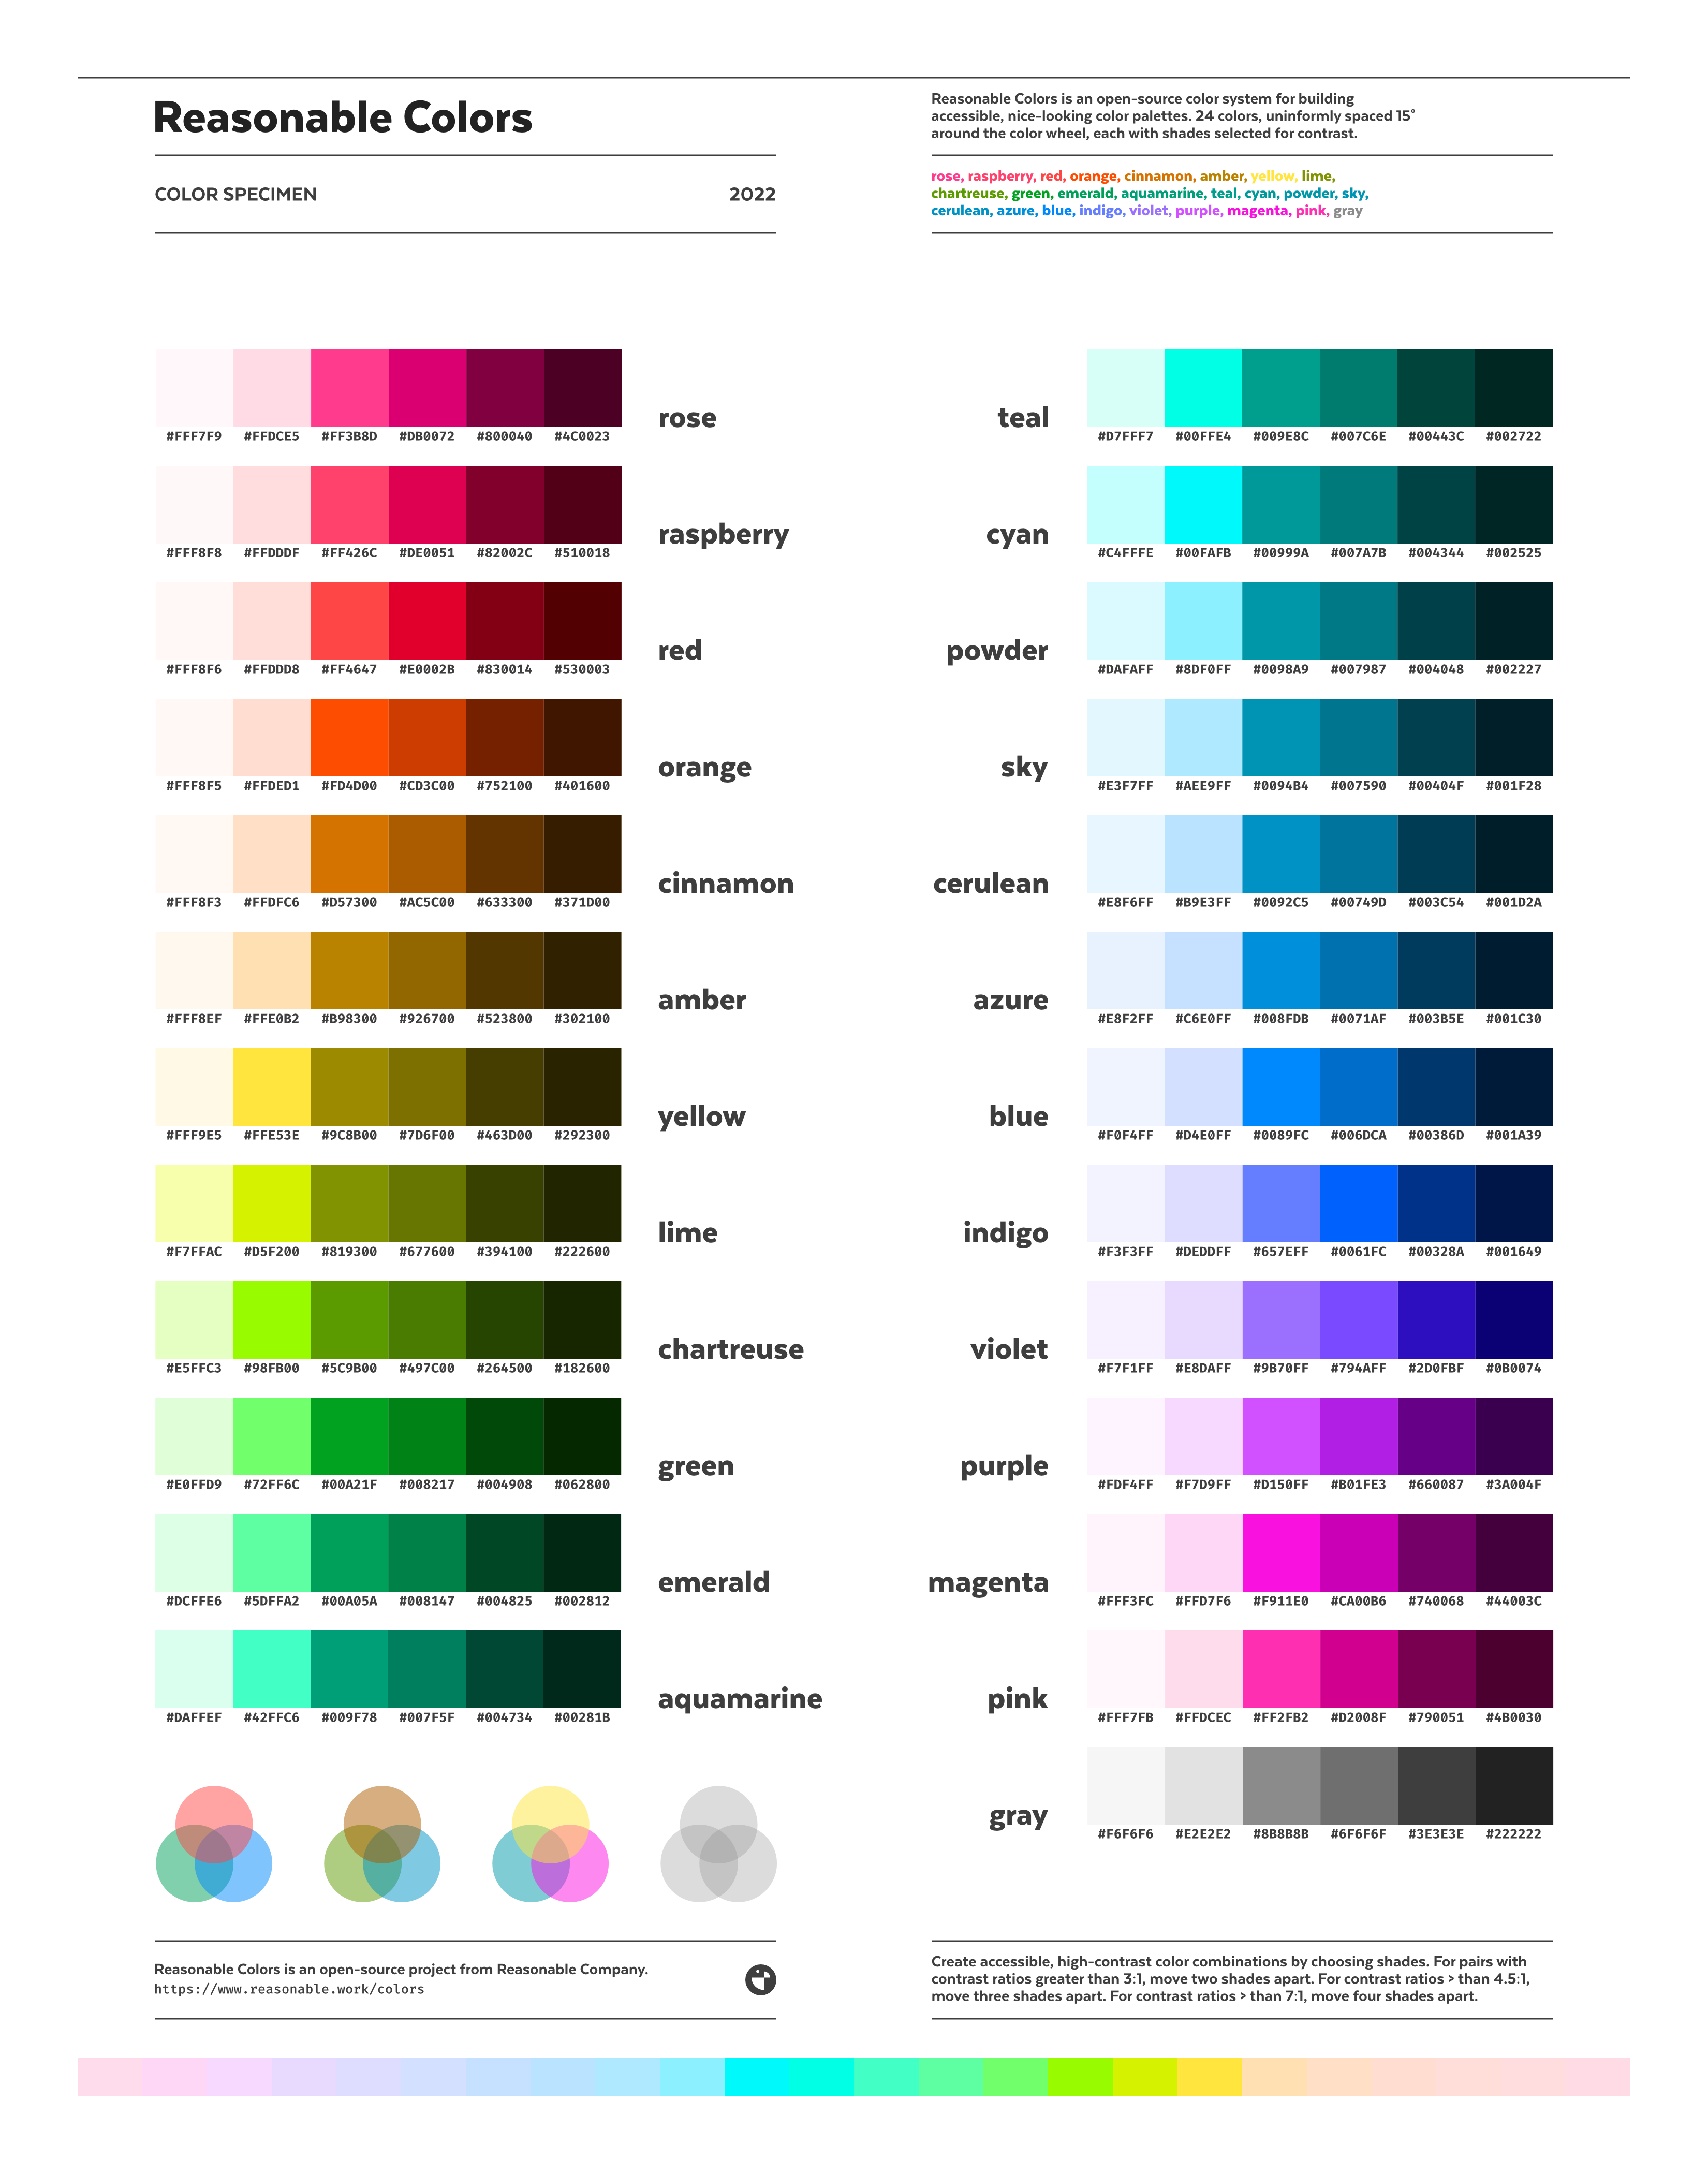 Reasonable Colors specimin document, lists all of the named colors and their six hues.